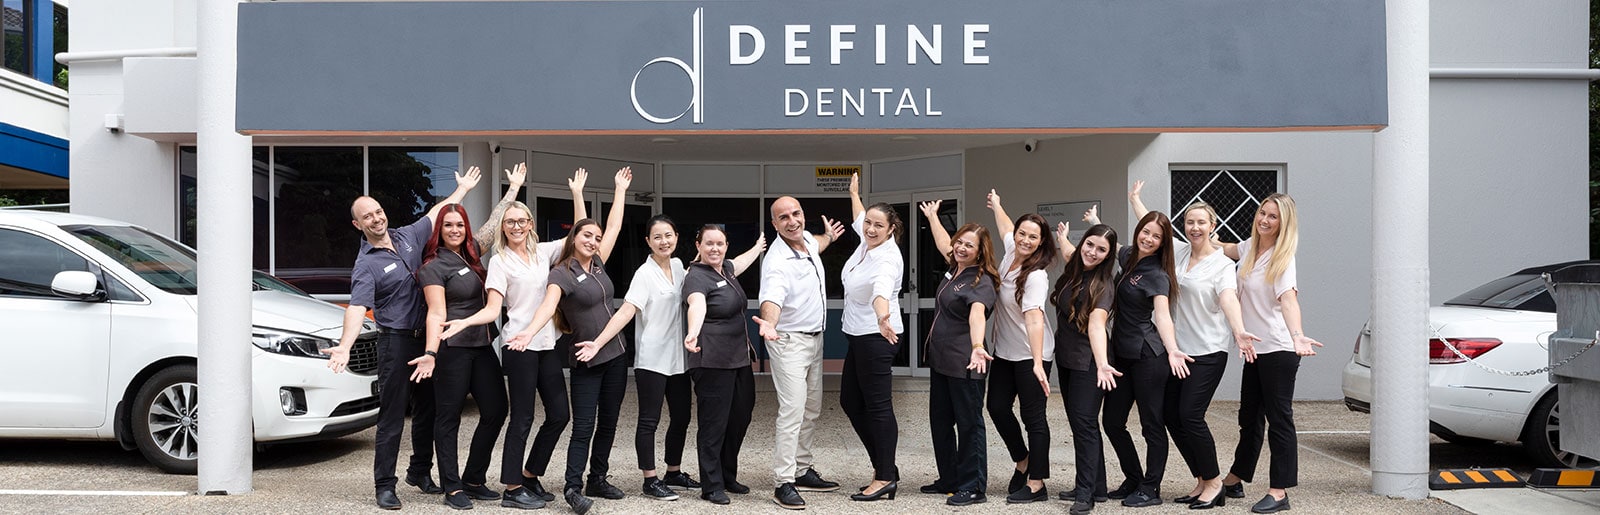 Ready to define your dental needs?